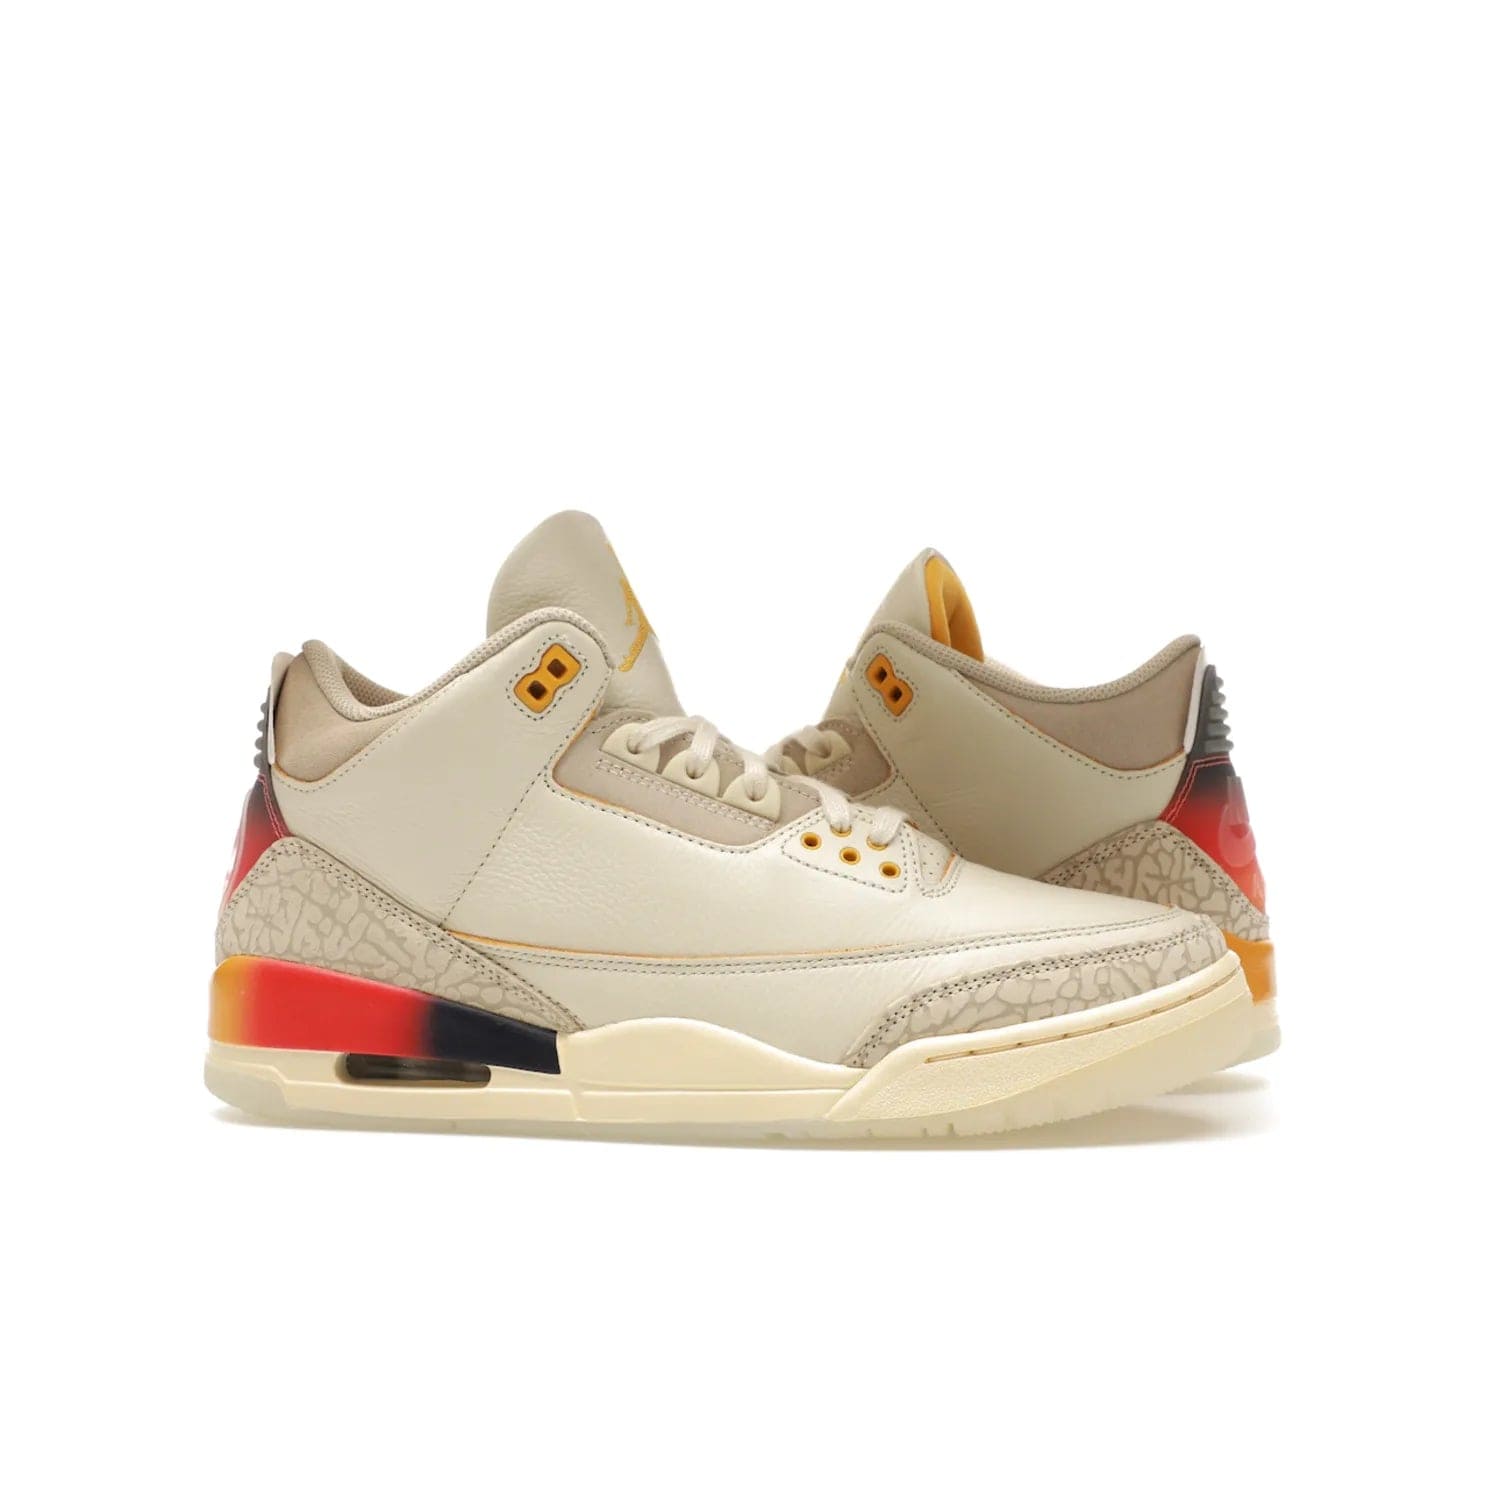 Jordan 3 Retro SP J Balvin Medellín Sunset - Image 2 - Only at www.BallersClubKickz.com - J Balvin x Jordan 3 Retro SP: Celebrate the joy of life with a colorful, homage to the electrifying reggaeton culture and iconic Jordan 3. Limited edition, Sept. 23. $250.